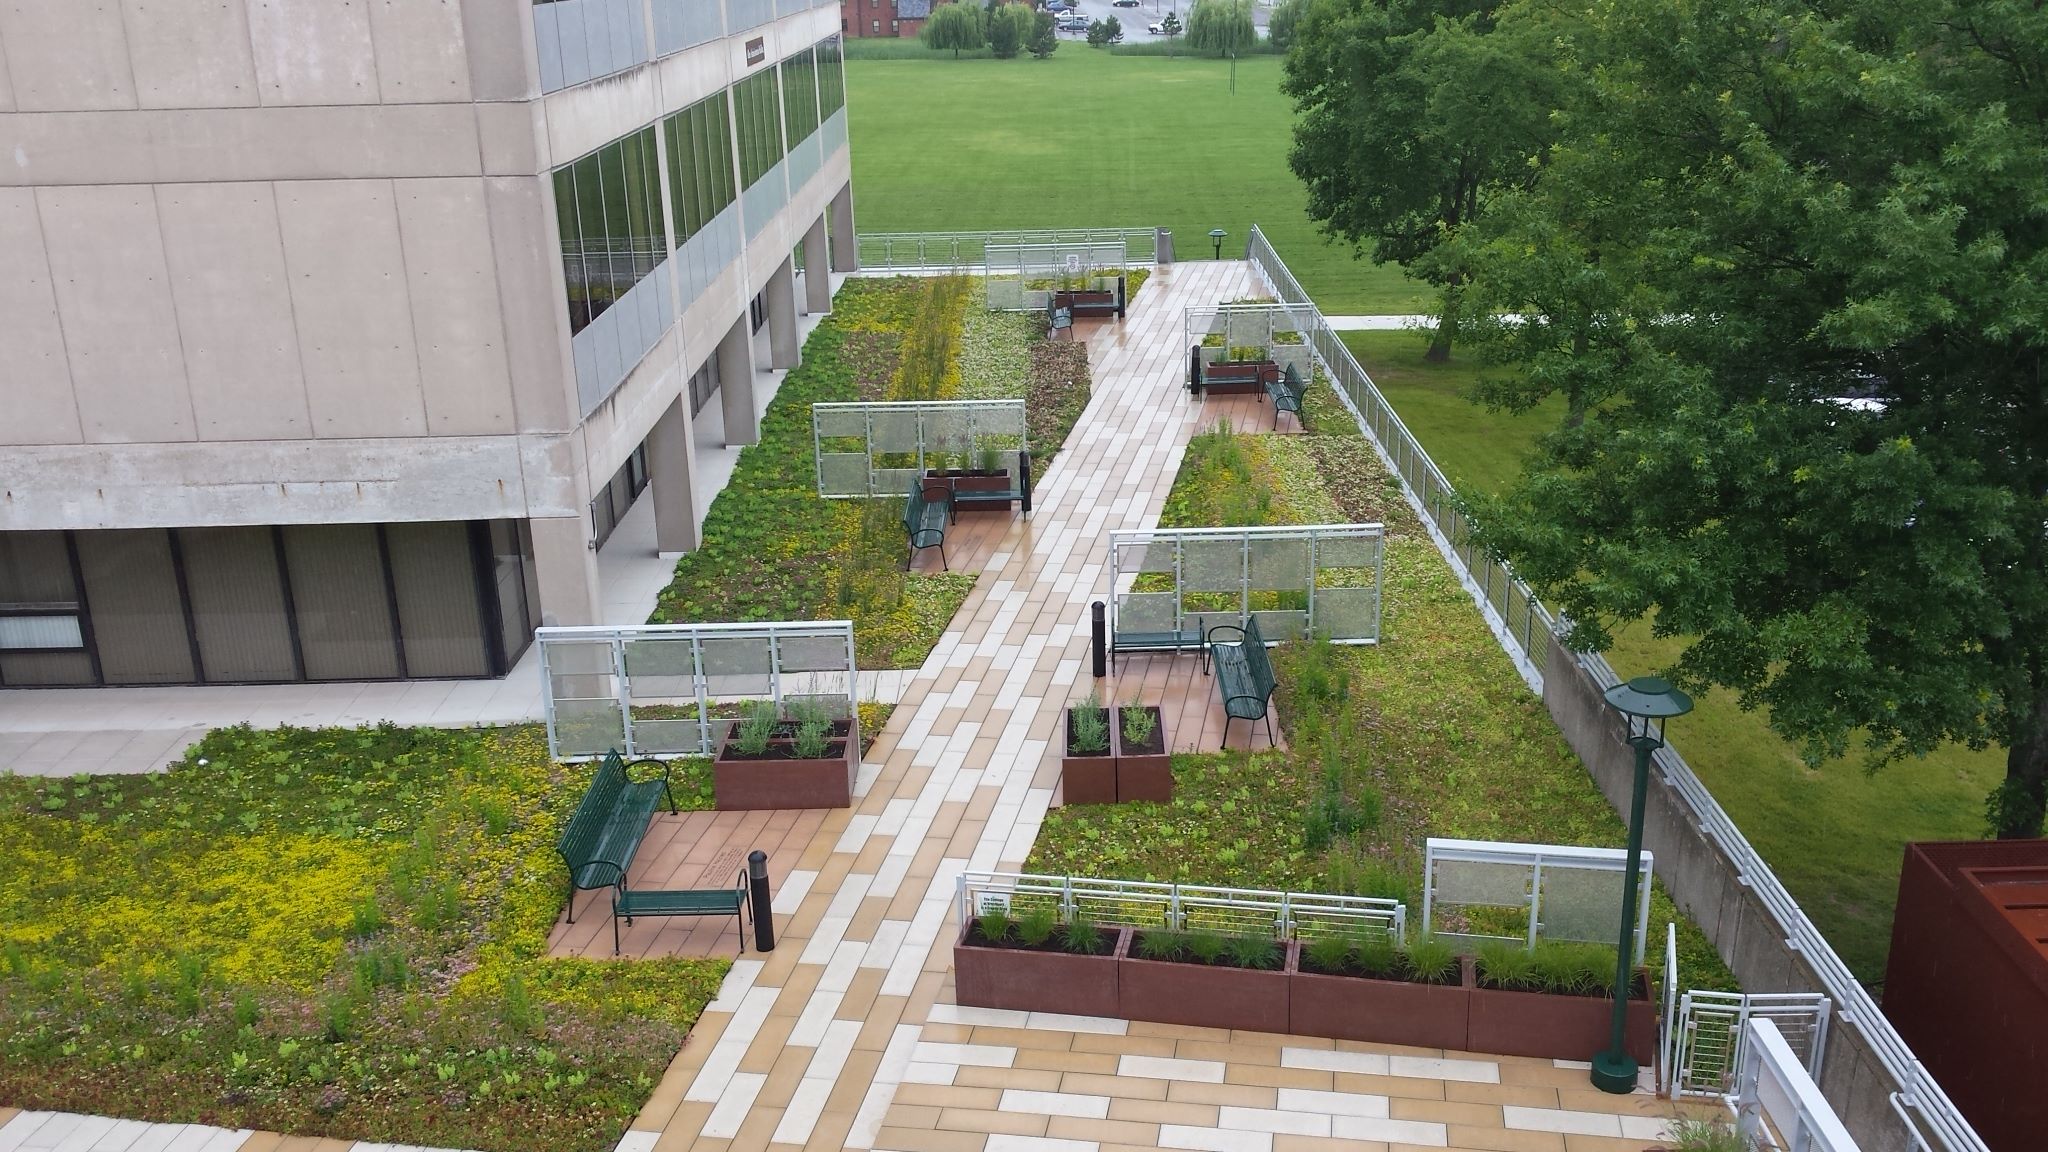 SUNY College of Brockport's Completed Green Roof Brings Designer's Vision to Life.